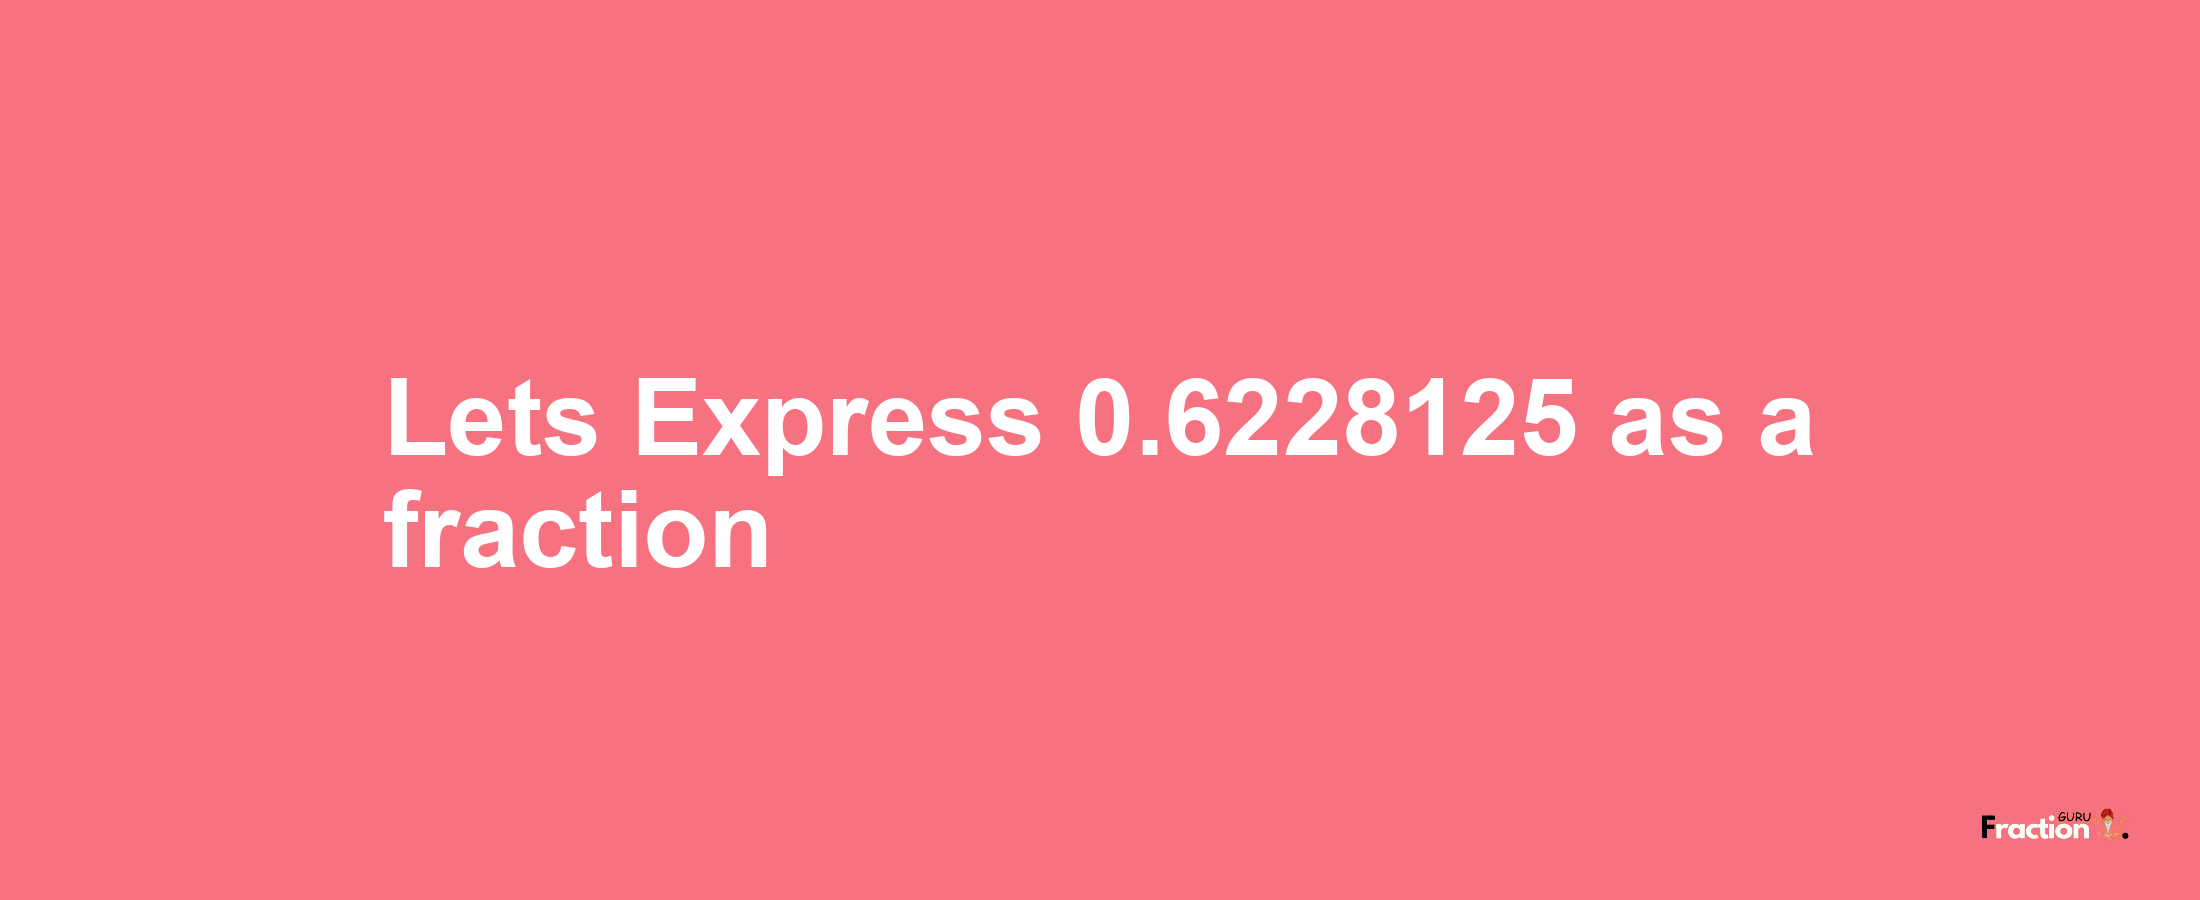 Lets Express 0.6228125 as afraction